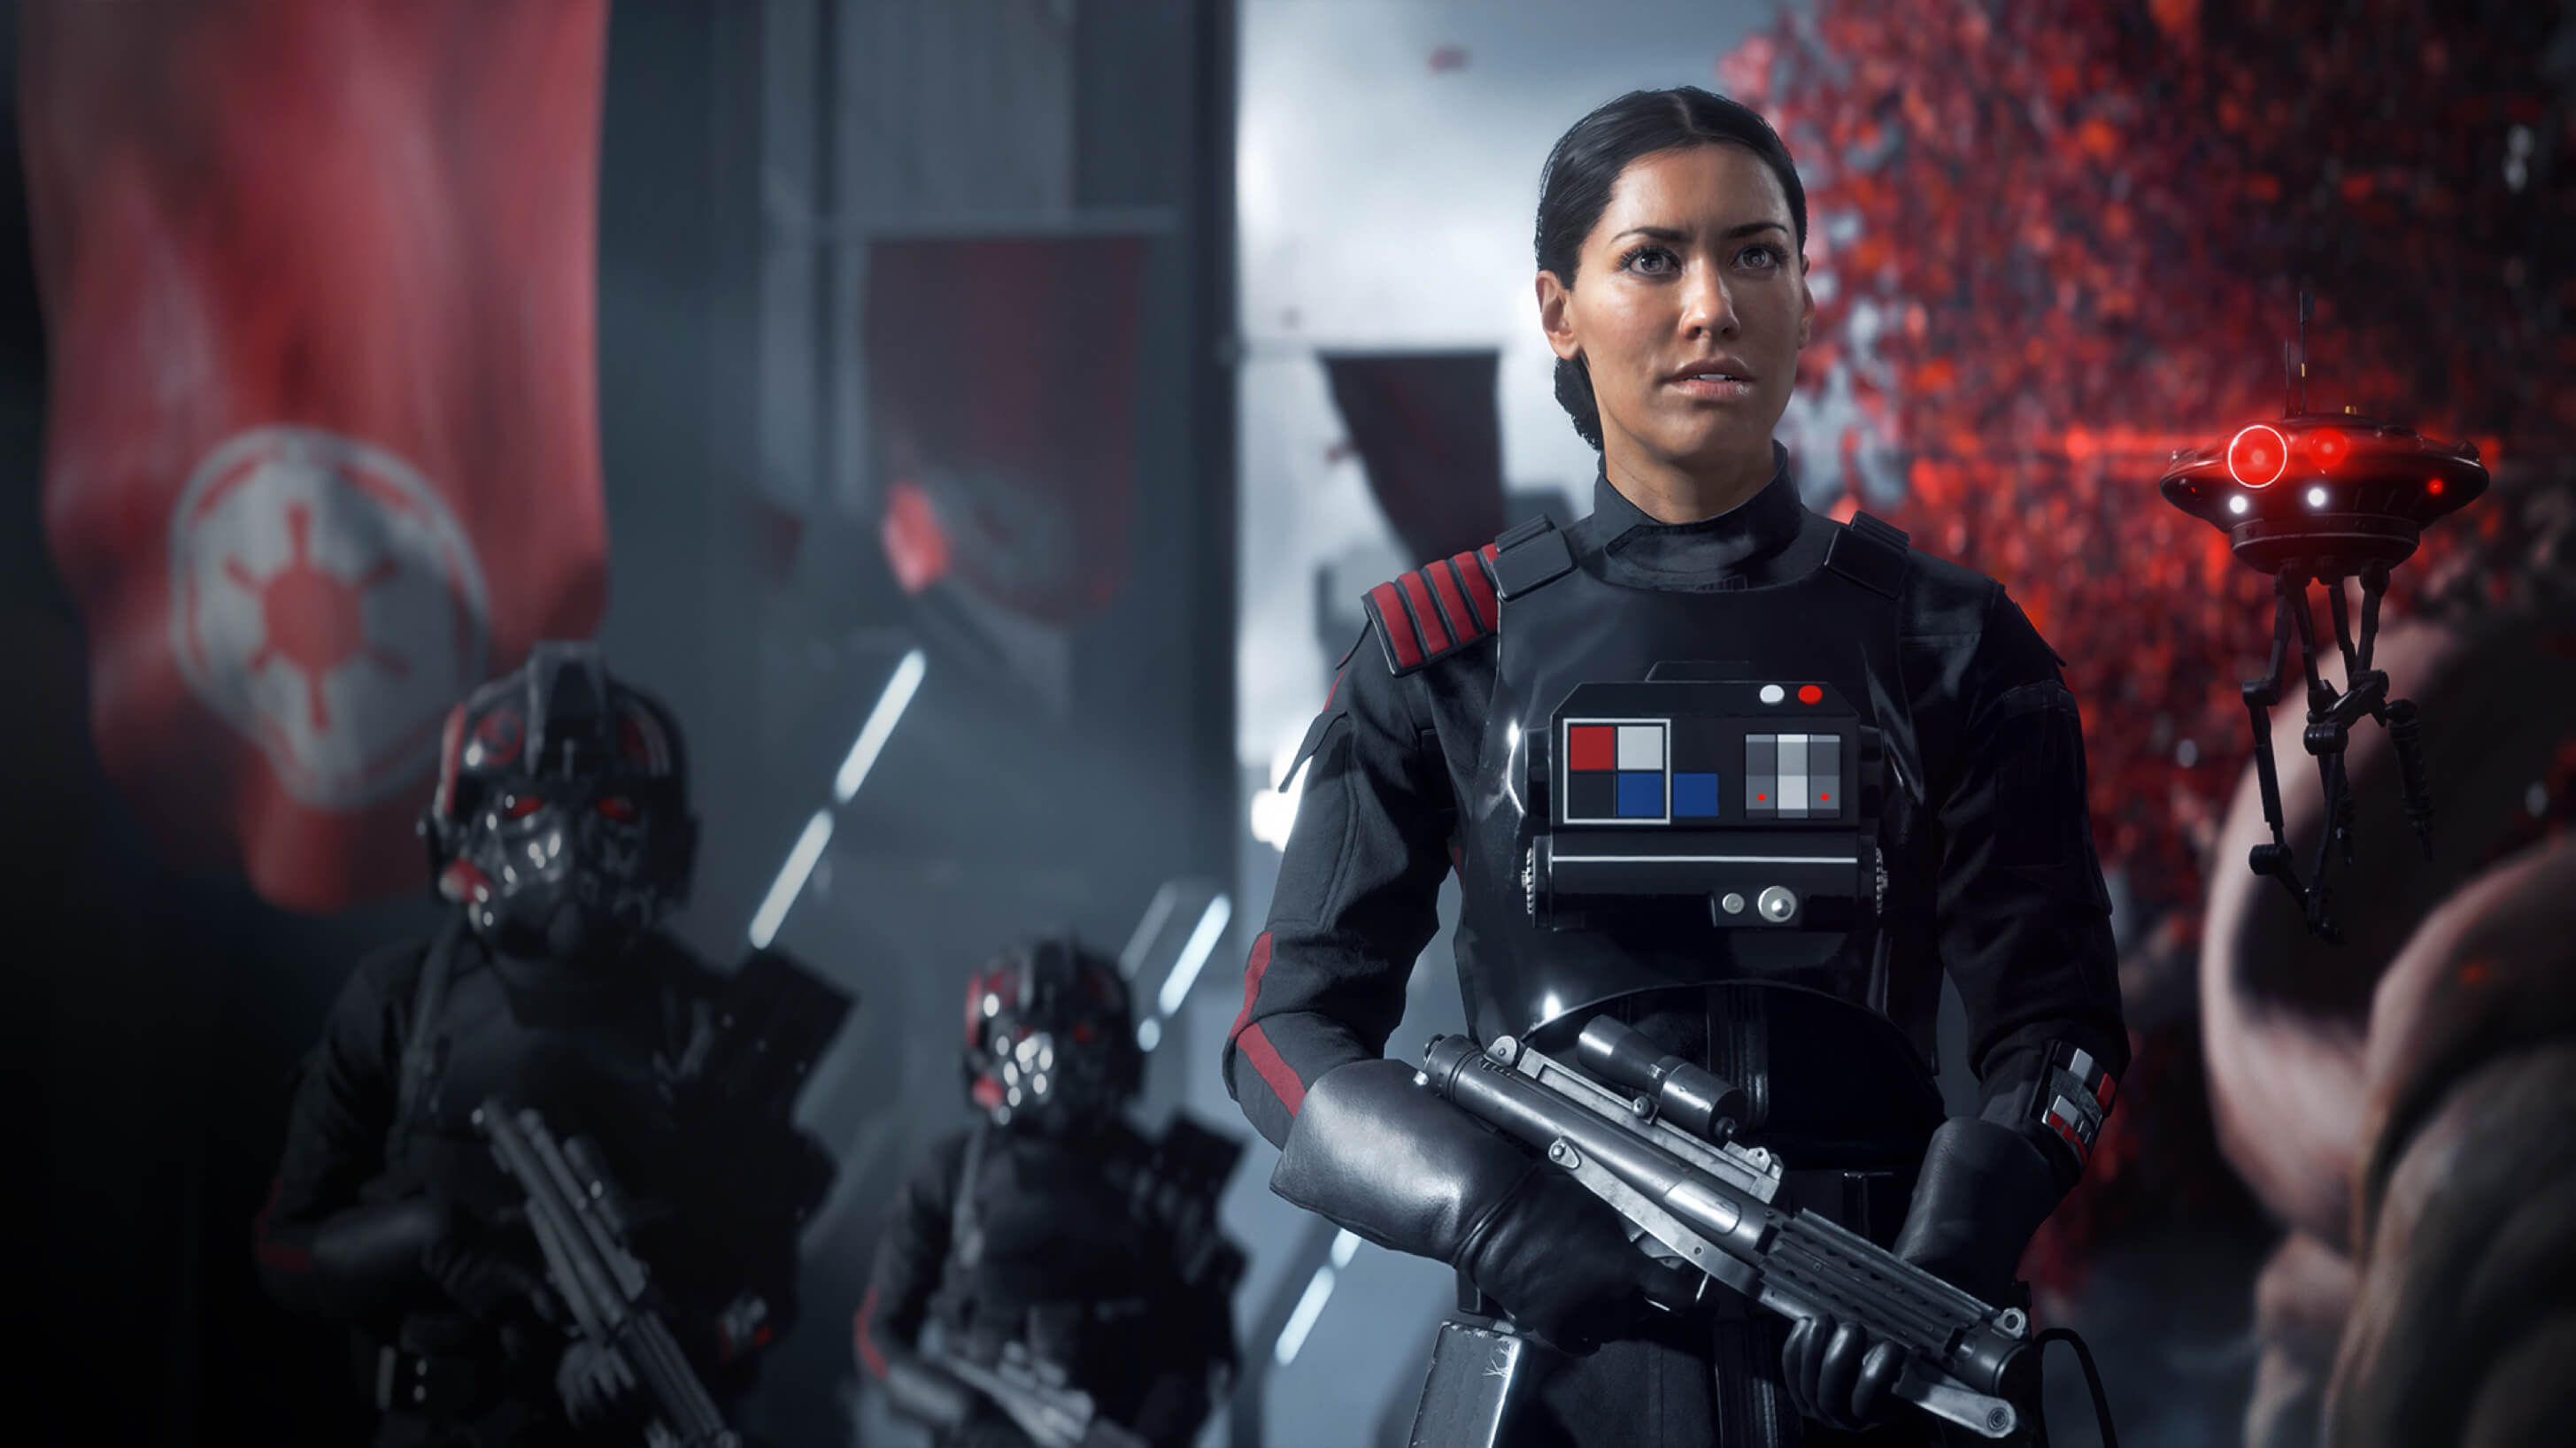 Image for Star Wars: Battlefront 2 video: Motive discusses why it wanted to tell the story from an Imperial viewpoint